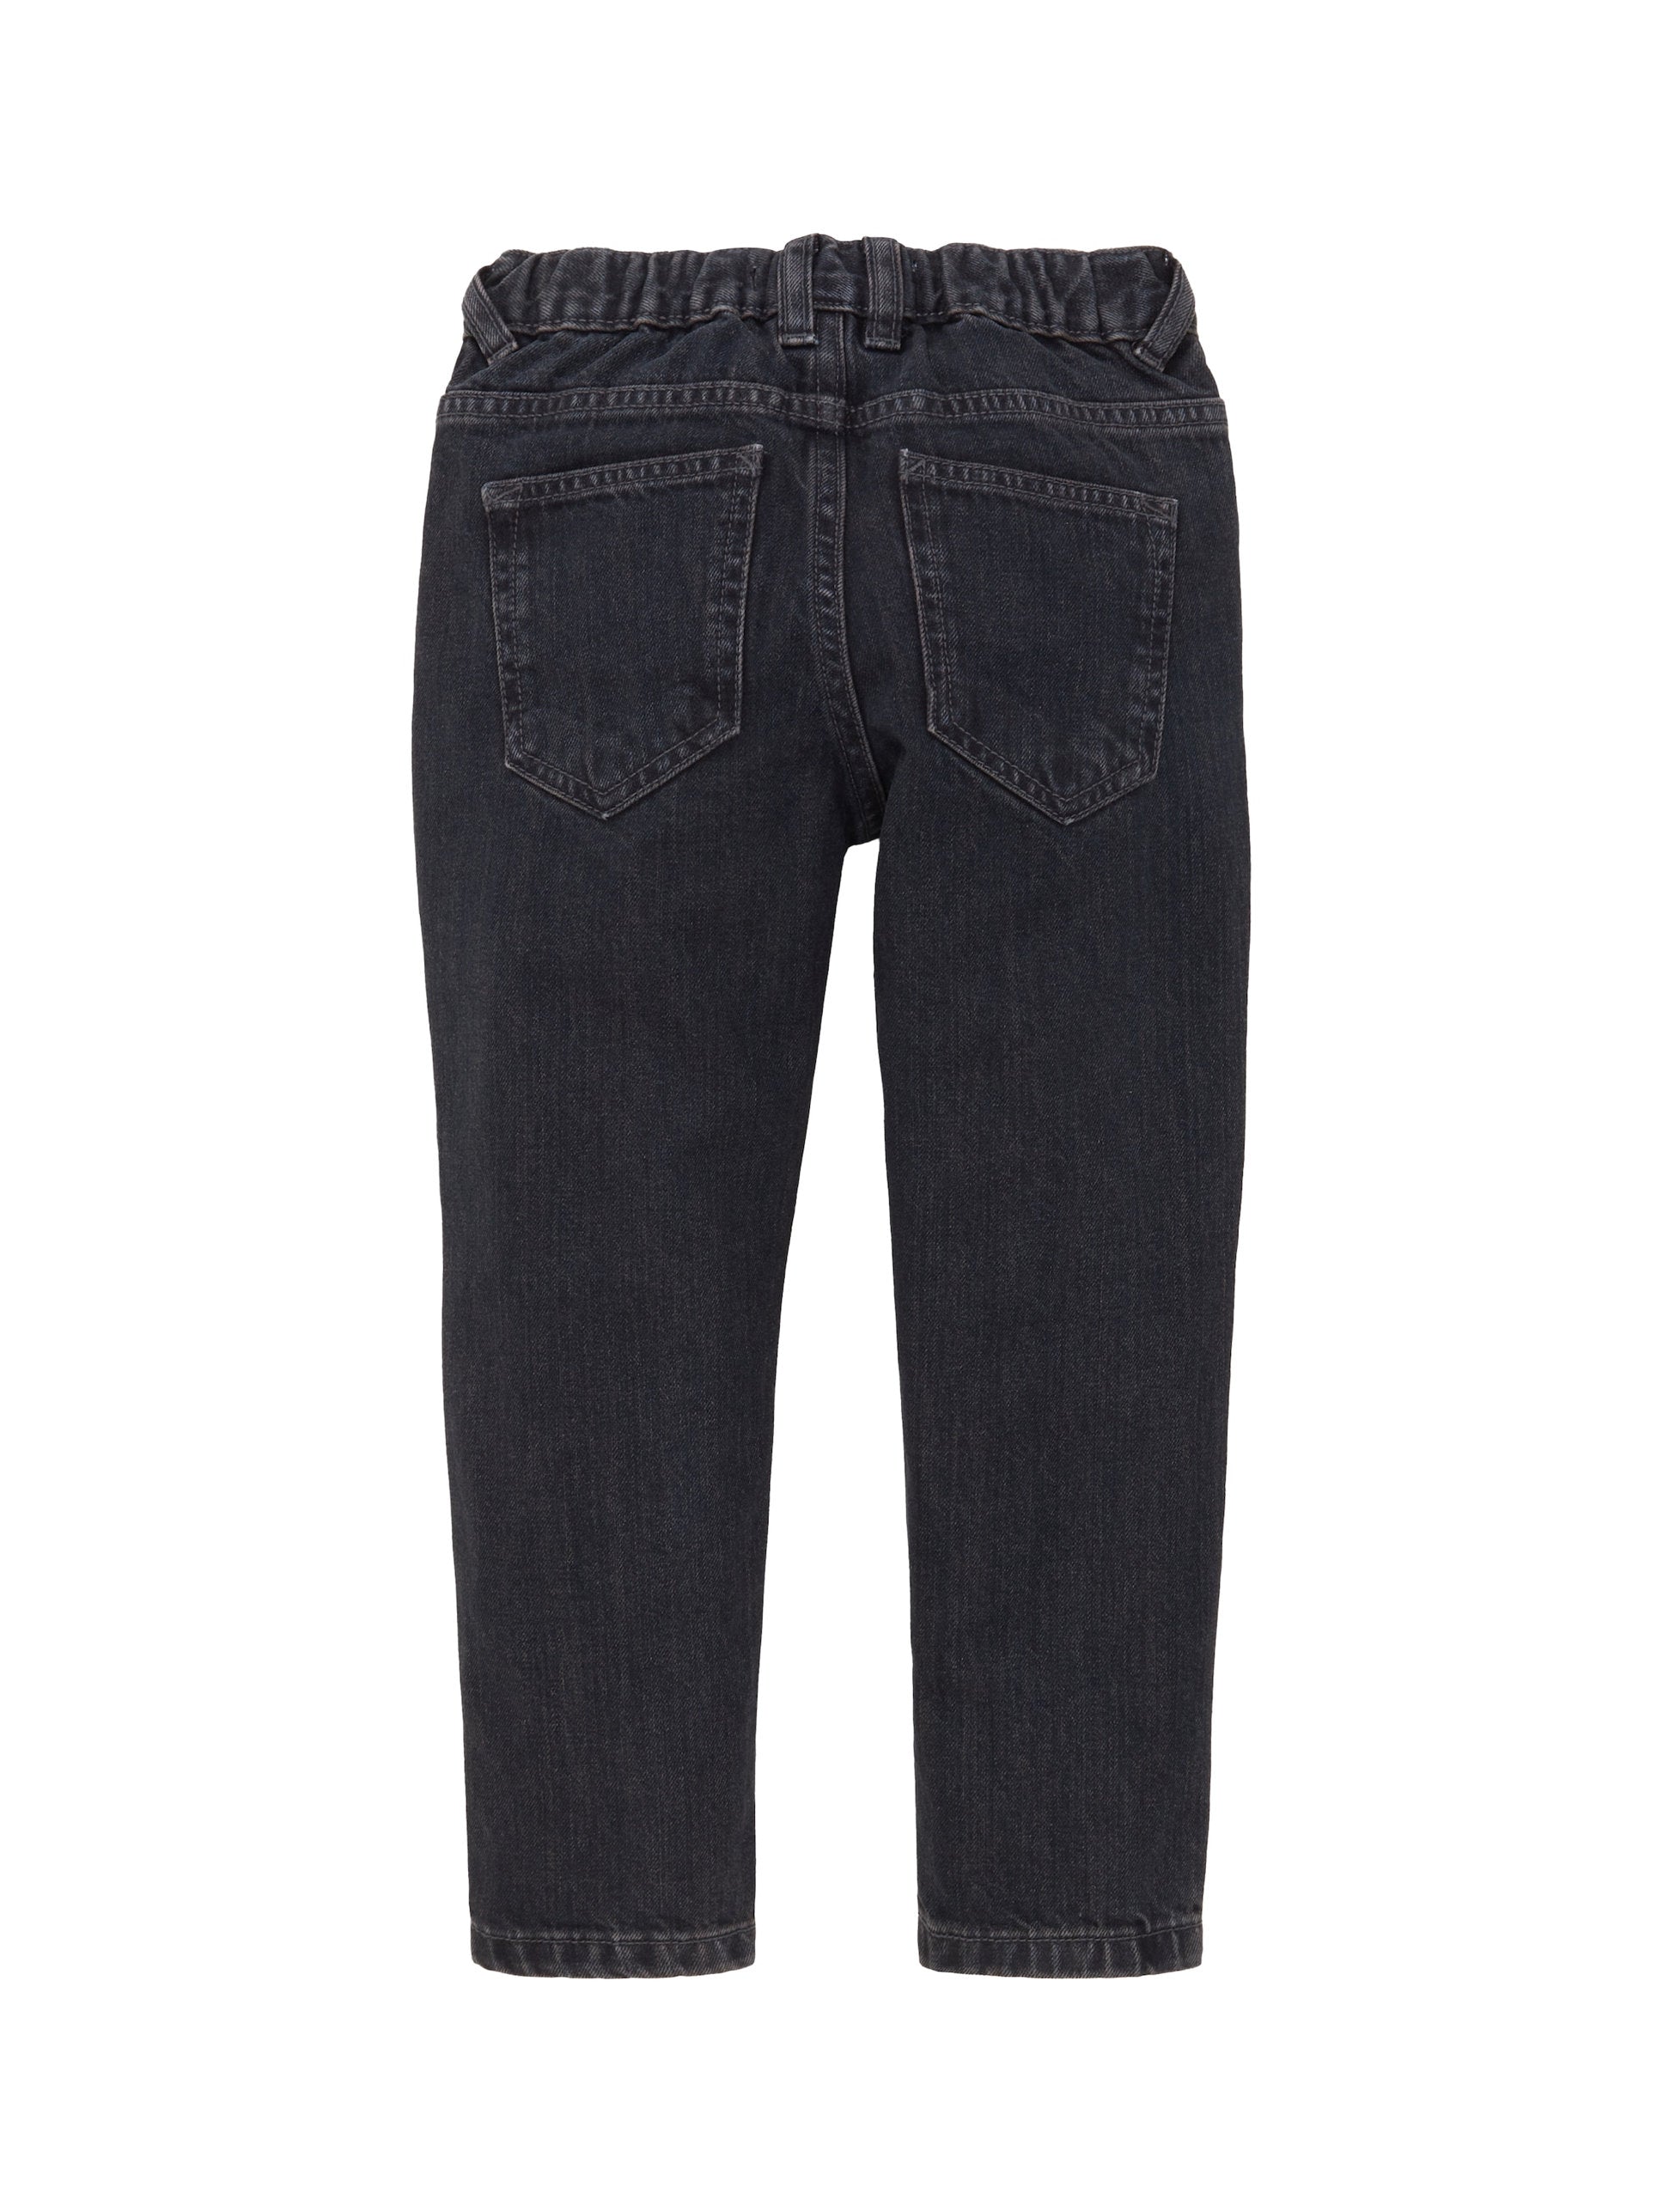 Colored Relaxed Denim Pants_1038406_29476_02